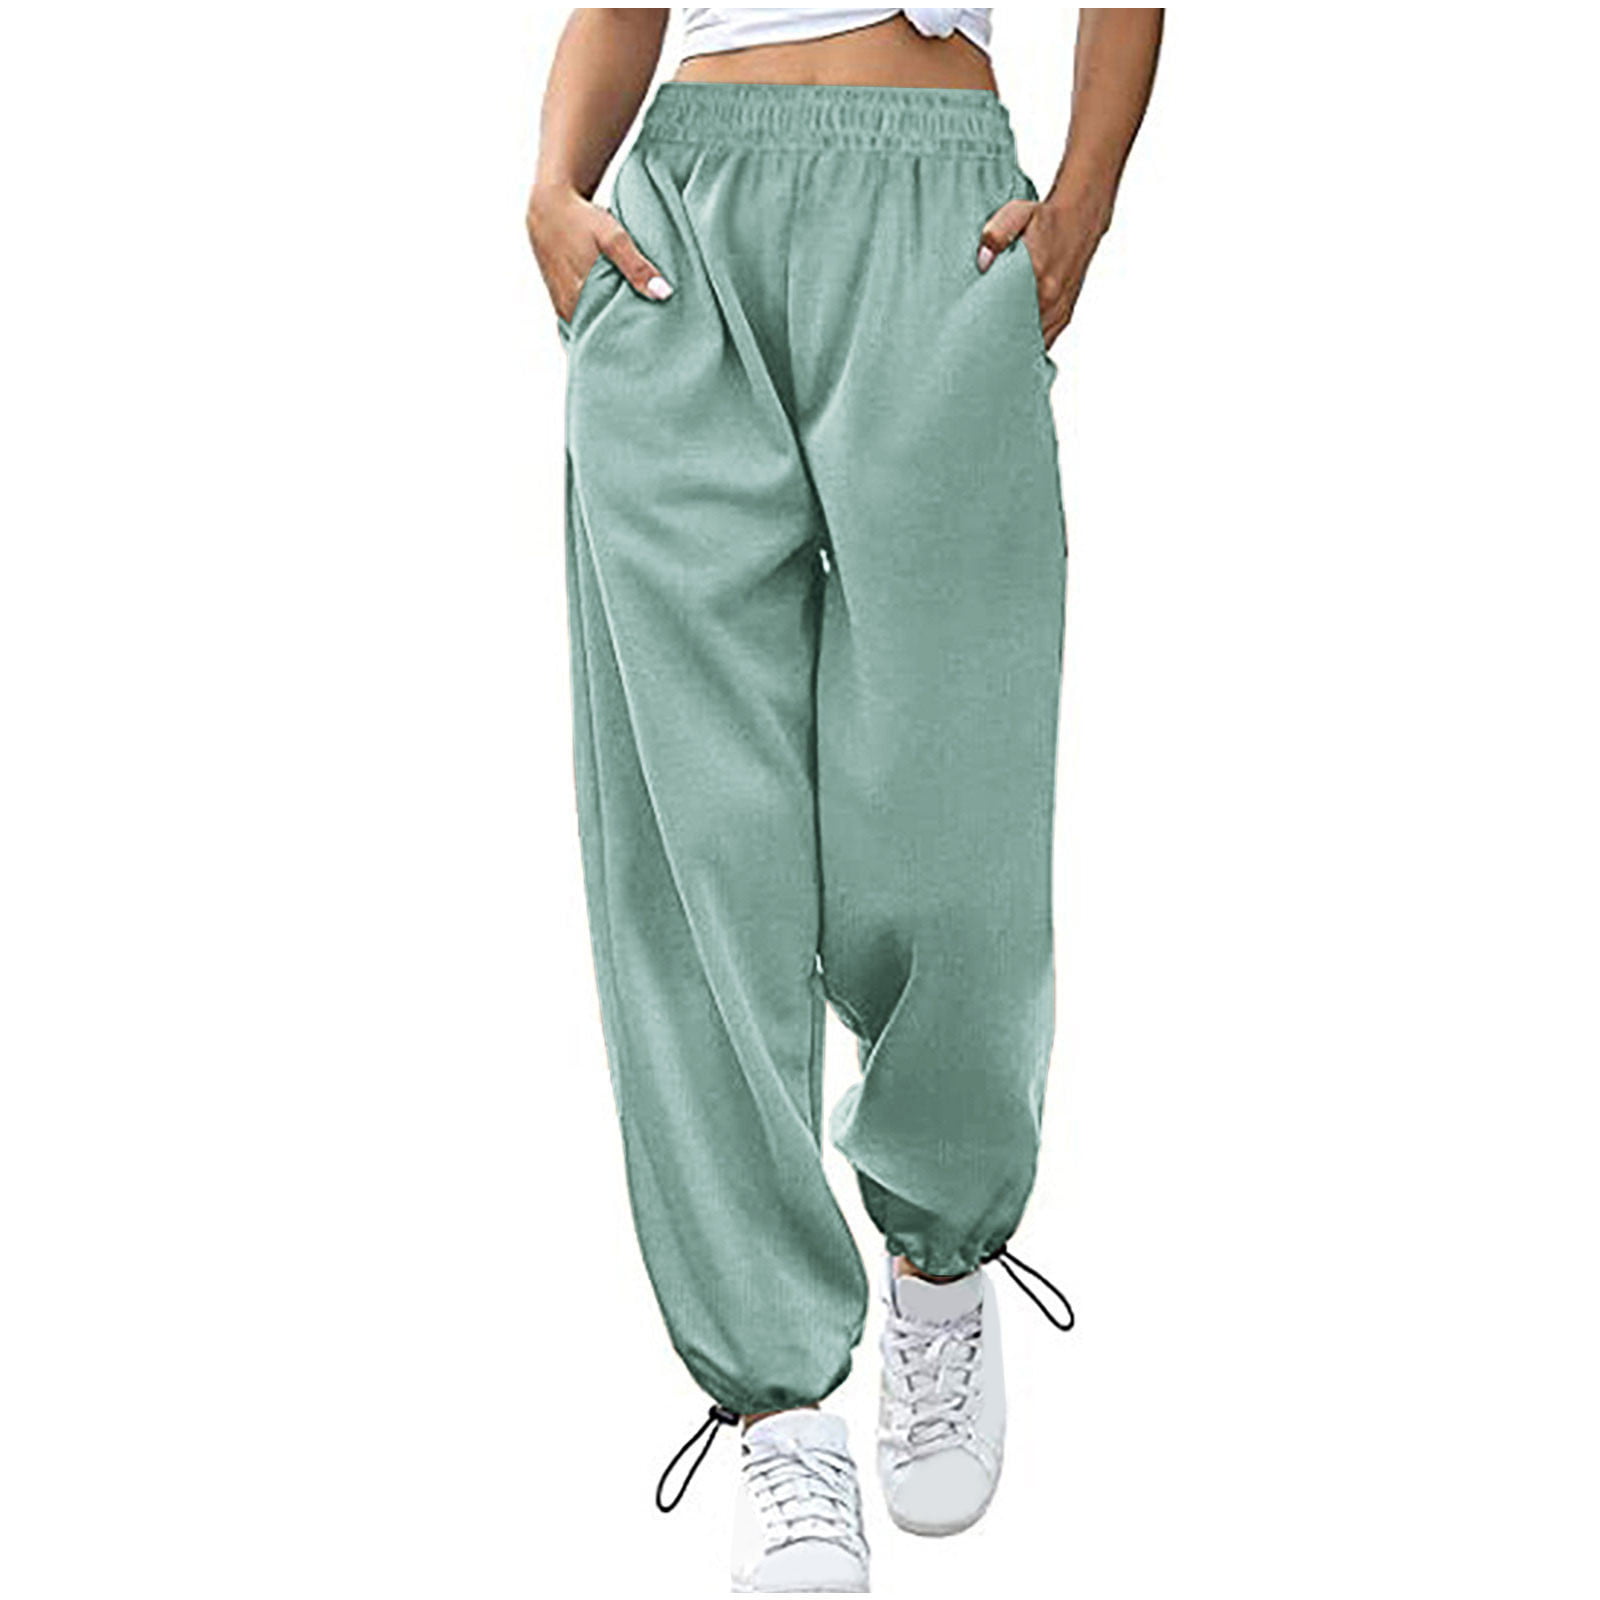 Women's Cinch Bottom Sweatpants Pockets High Waist Sporty Gym Athletic Fit  Jogger Pants Lounge Trousers Army Green XL